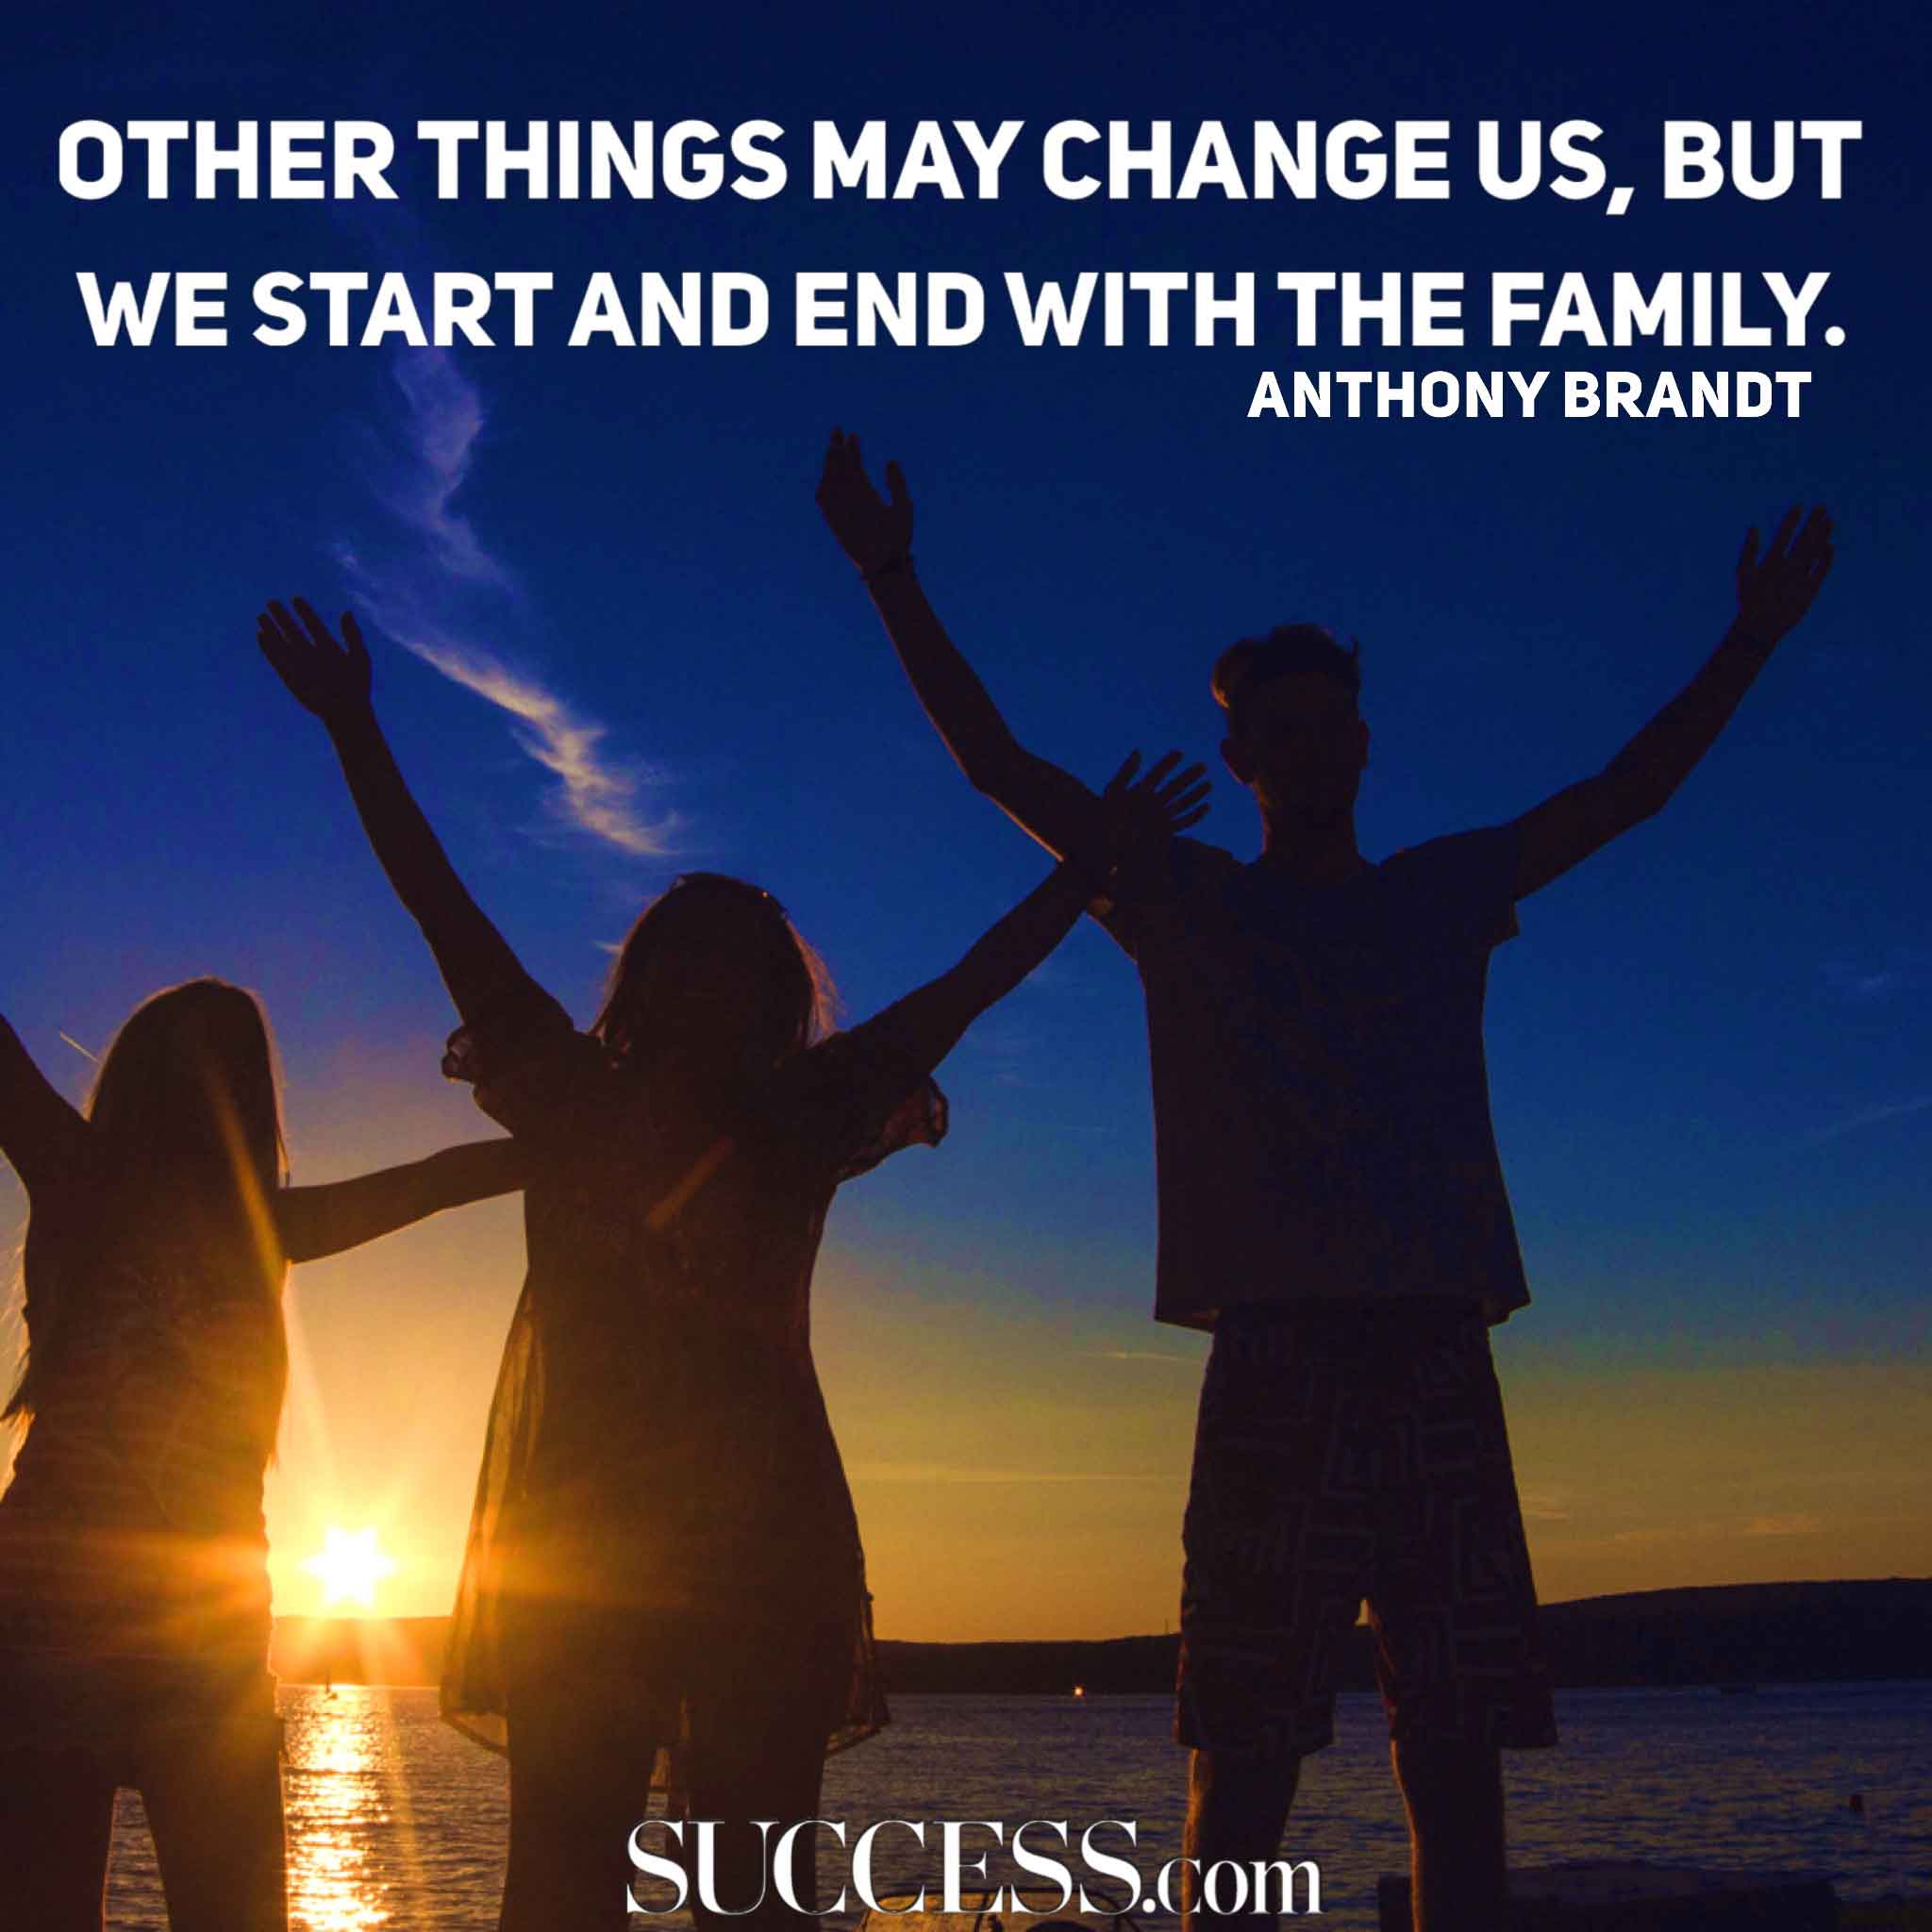 14 Loving Quotes About Family | SUCCESS